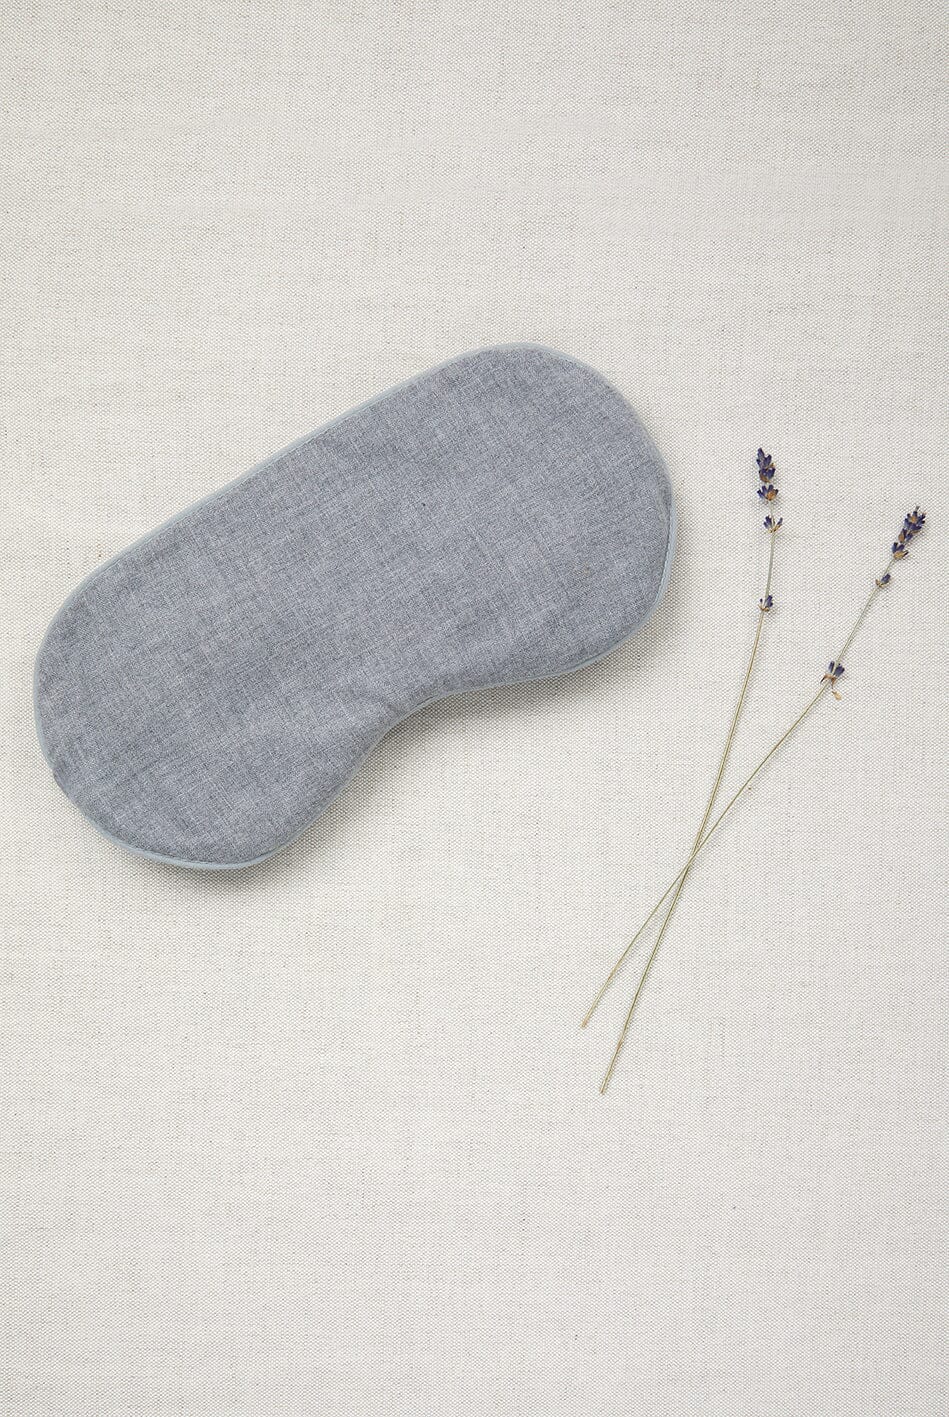 Aromatherapy Lavender Scented Eye Mask Lavender Scented Toiletries Lavender Hill